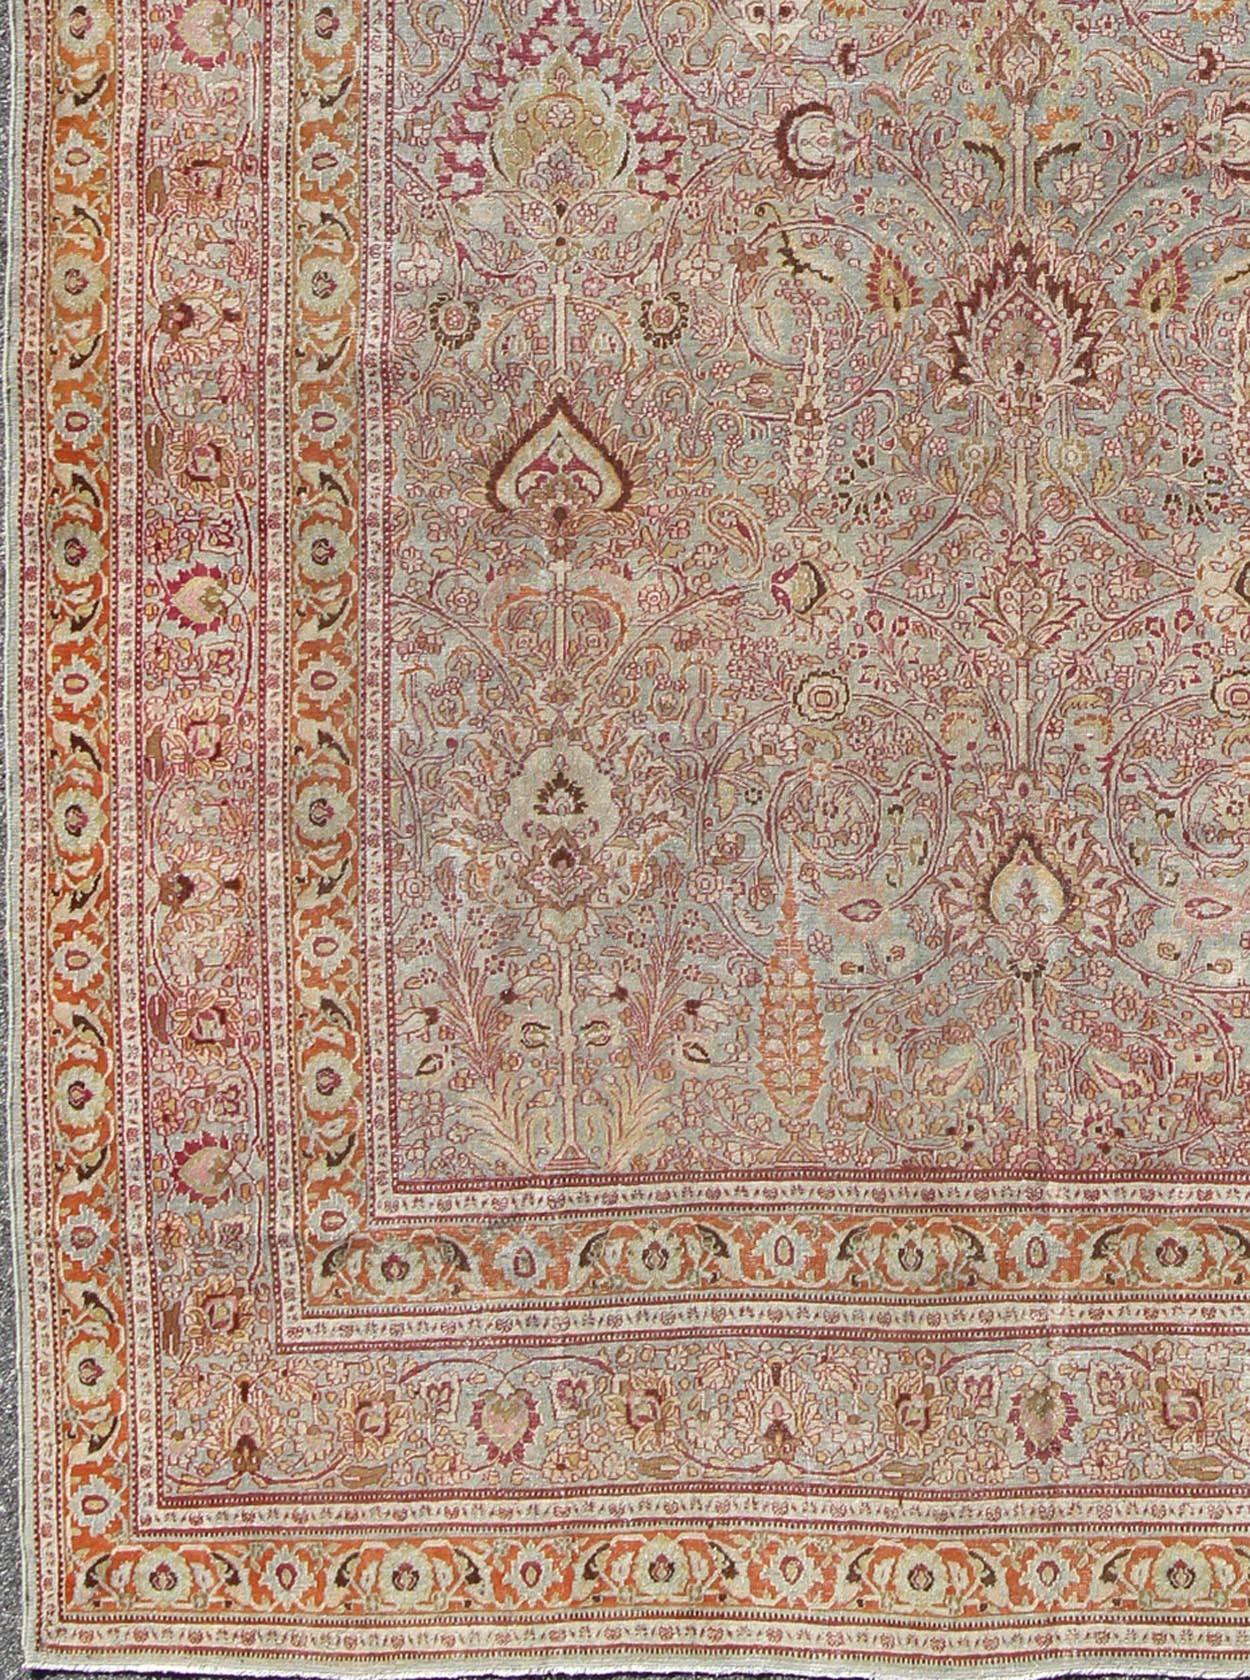 Antique Persian Khorassan rug with floral design in Gray-Blue background, orange, red pink, rug 16-0916, country of origin / type: Iran / Khorassan, circa 1900

This spectacular antique Persian Khorasan carpet from early 20th century Iran bears a